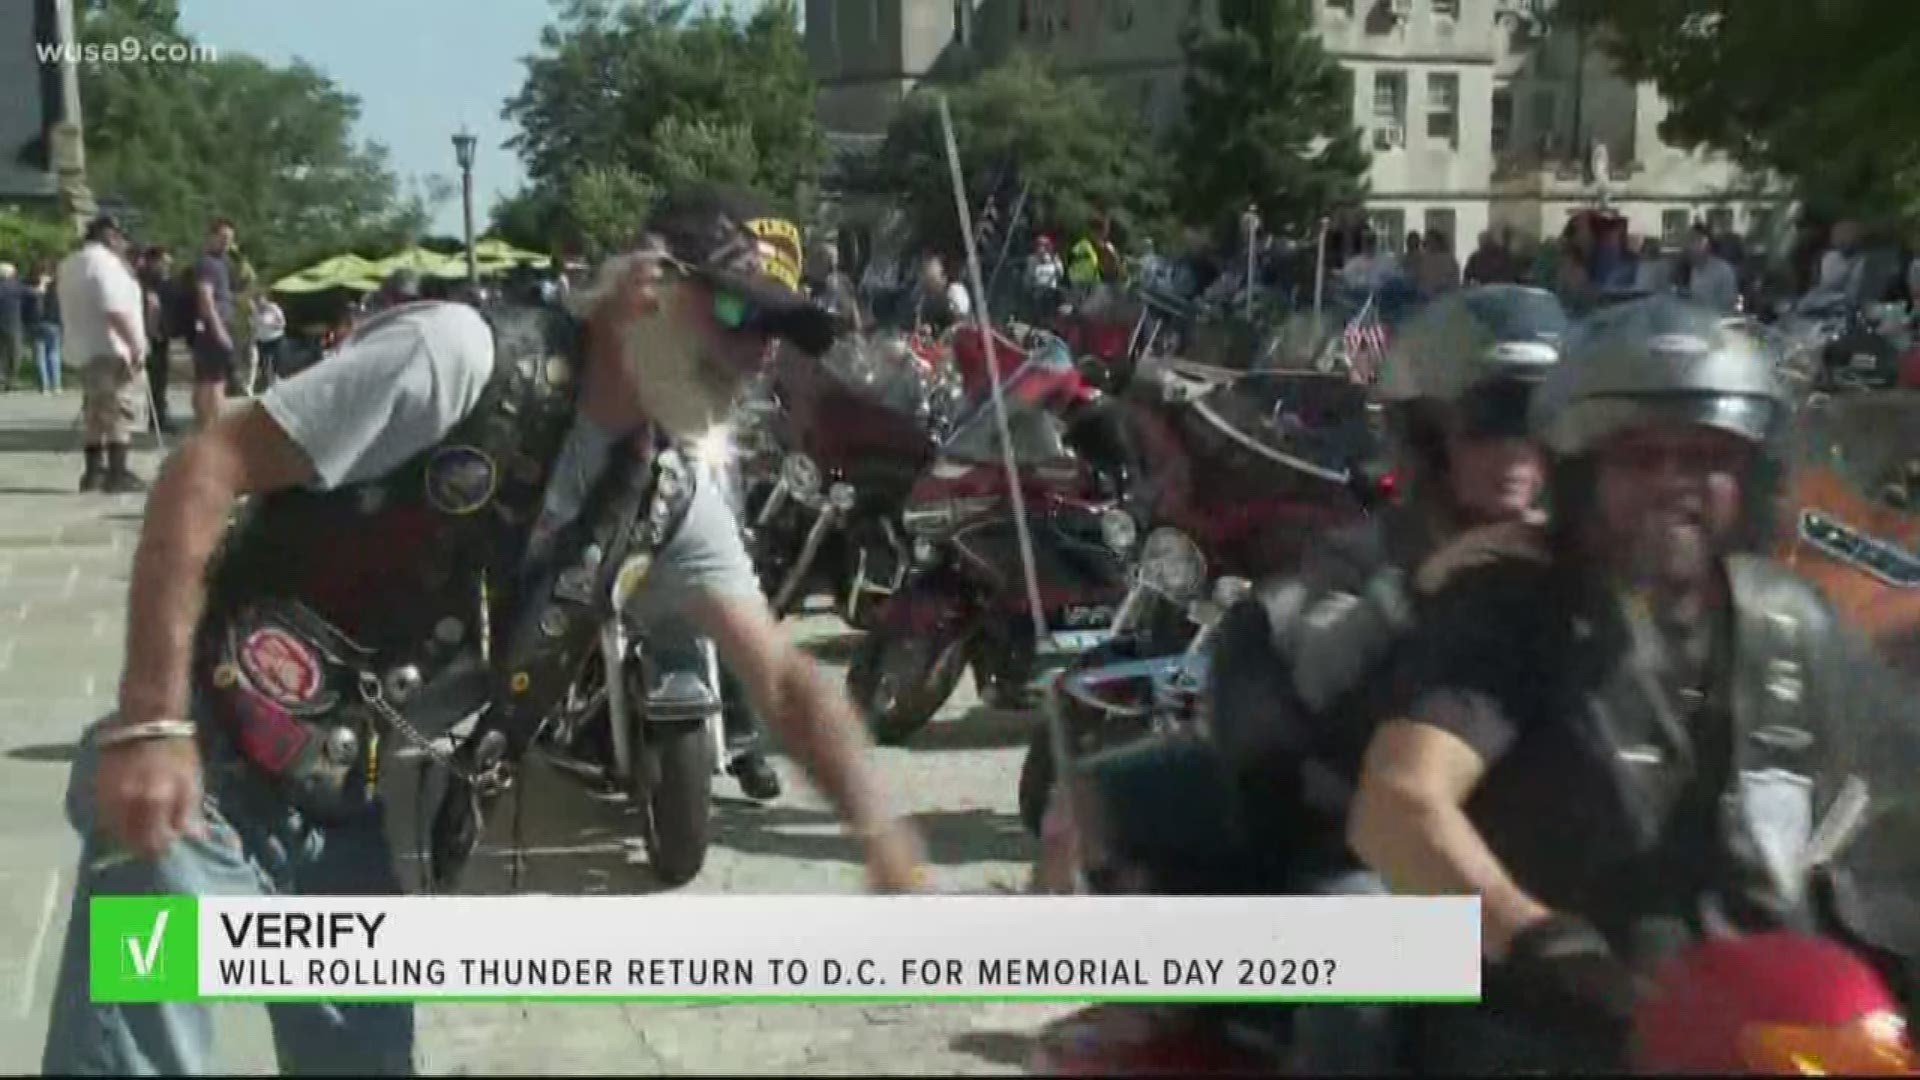 'We will not be back in DC next year,' a Rolling Thunder spokesperson confirmed.